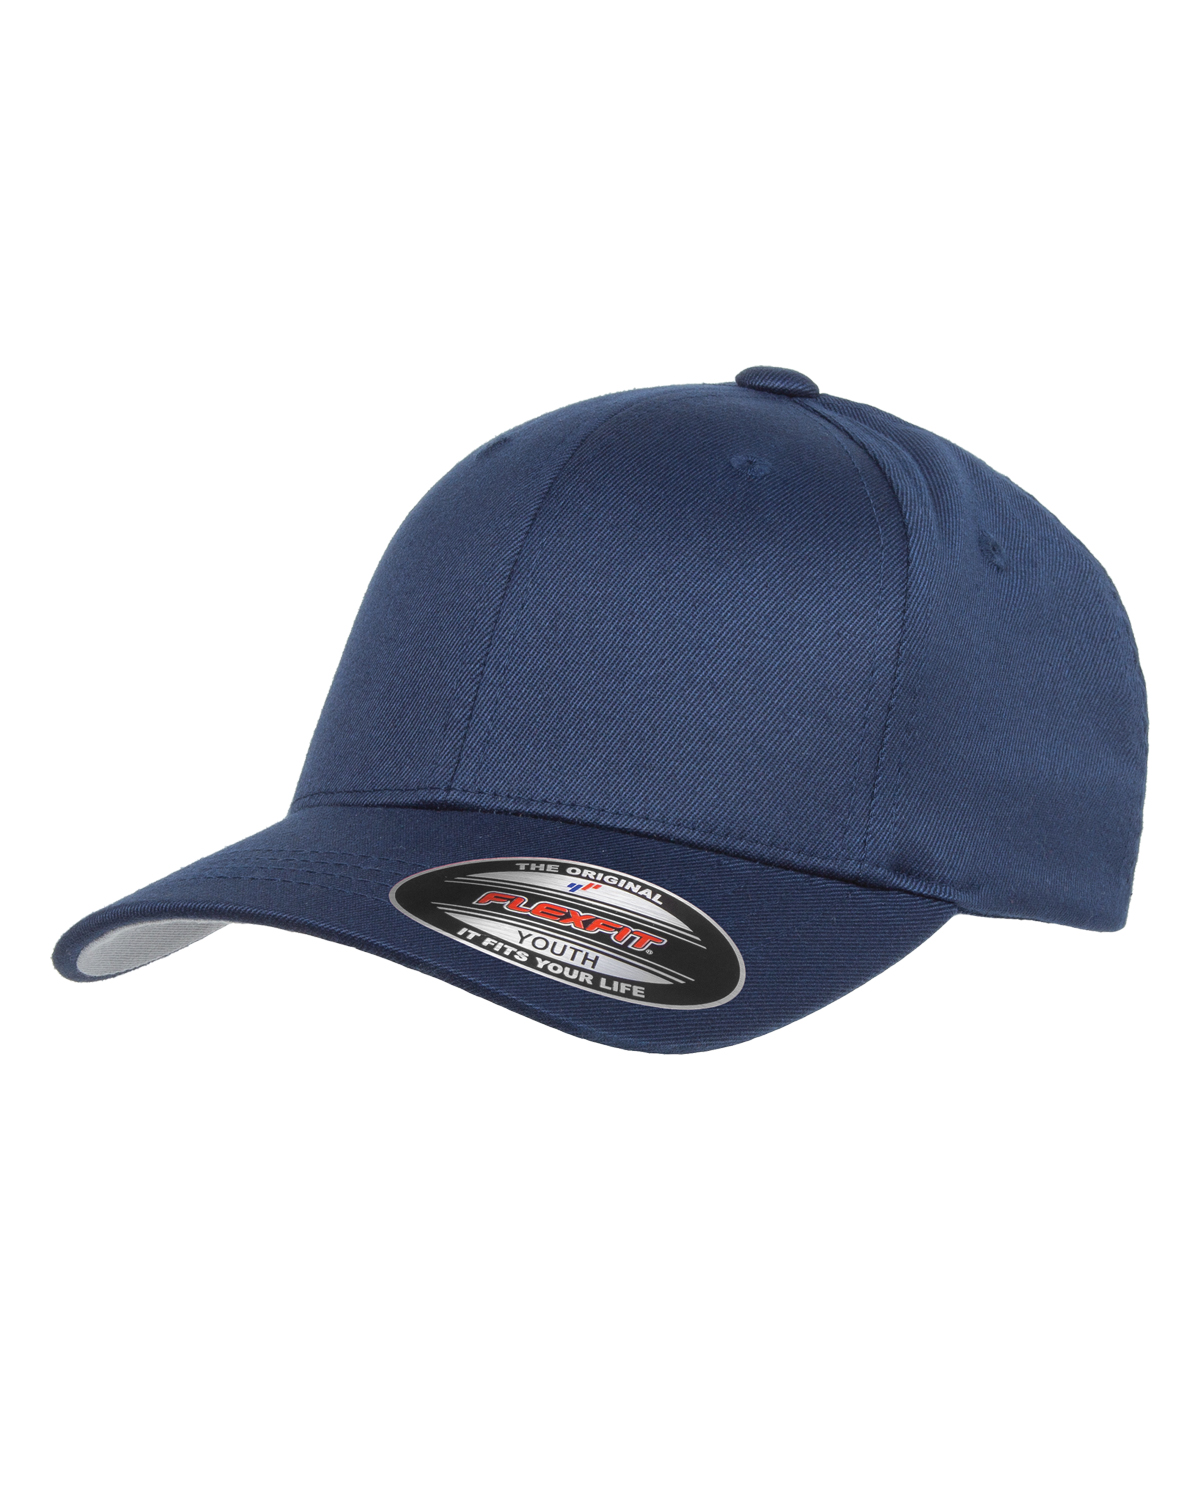 Flexfit Brushed Twill Youth Camo Blue and Navy Cap 